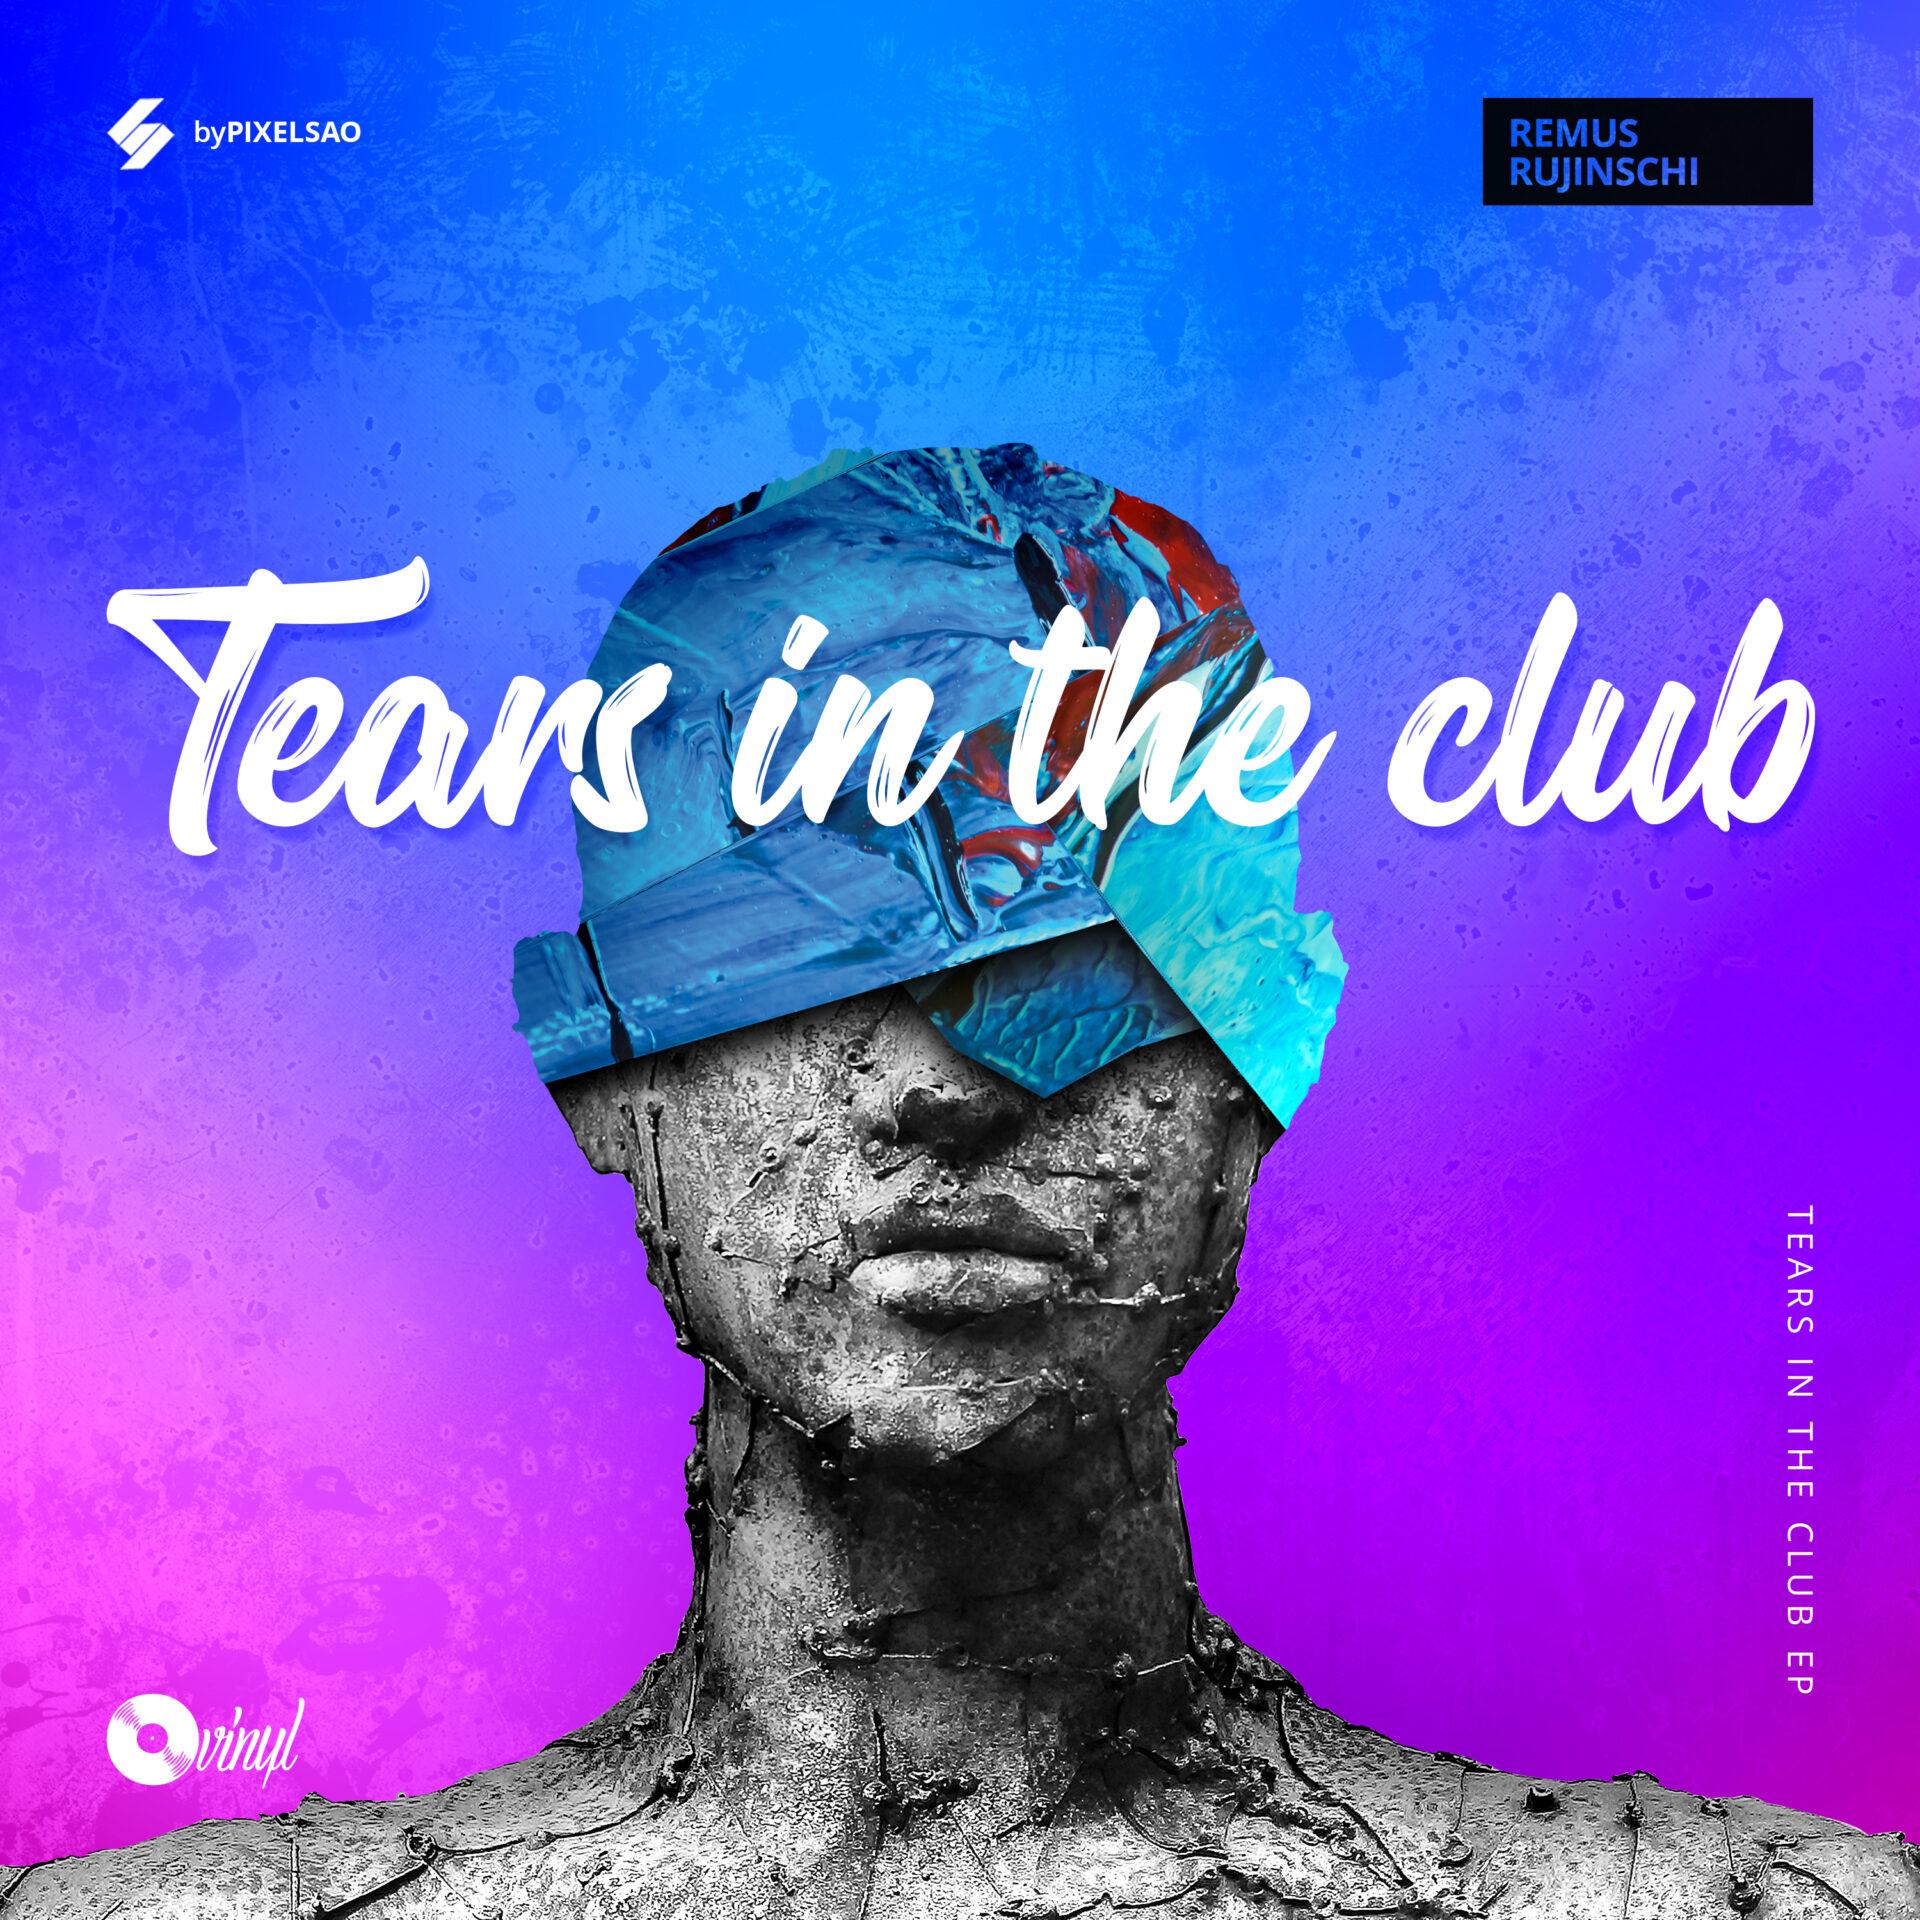 Remus Rujinschi released mesmerizing new song 'Tears In The Club - No Tears Mix'